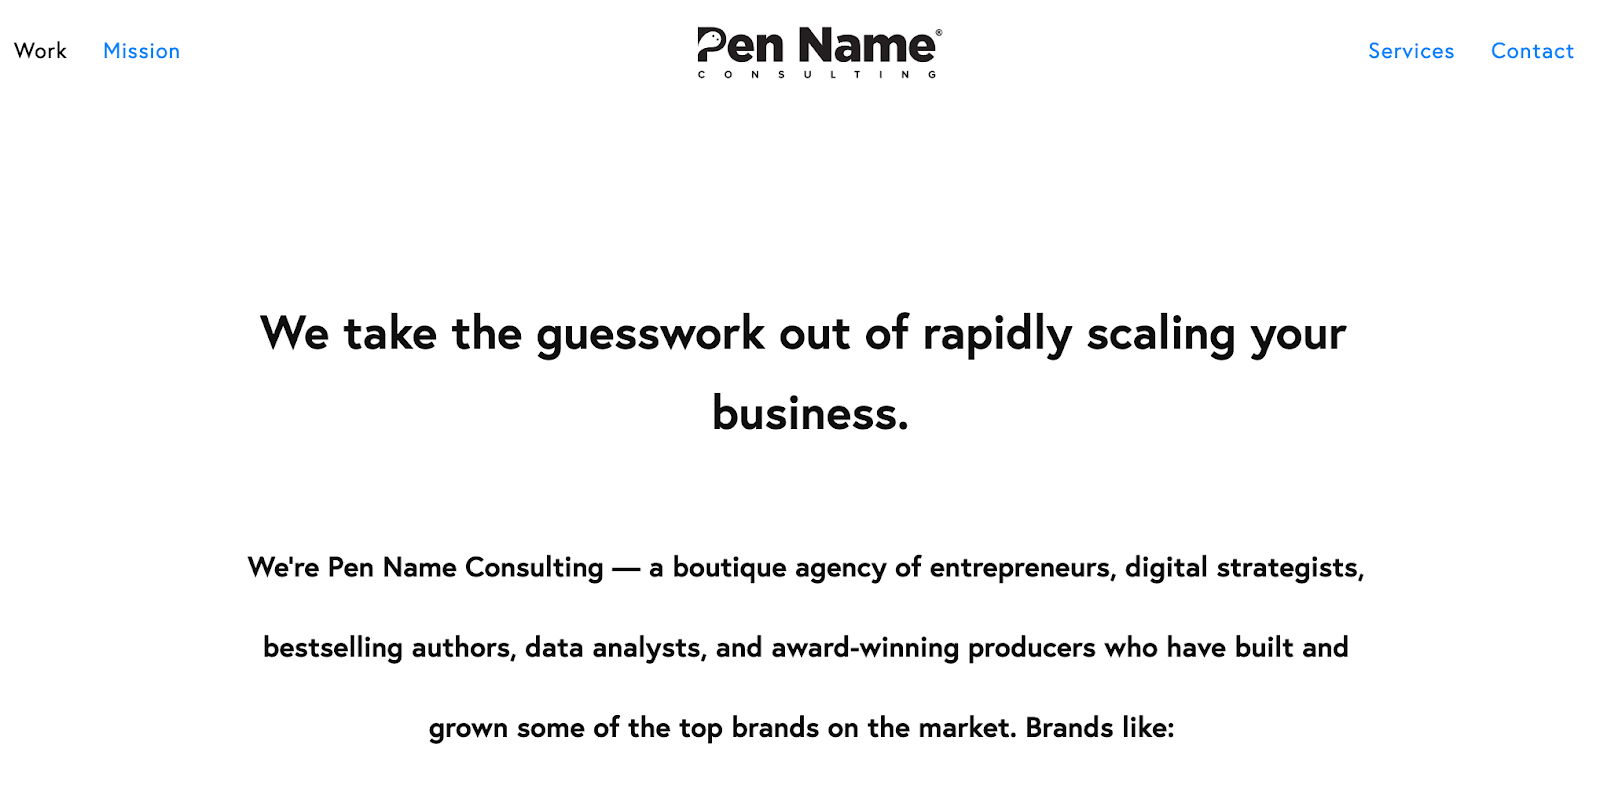 Pen Name Consulting